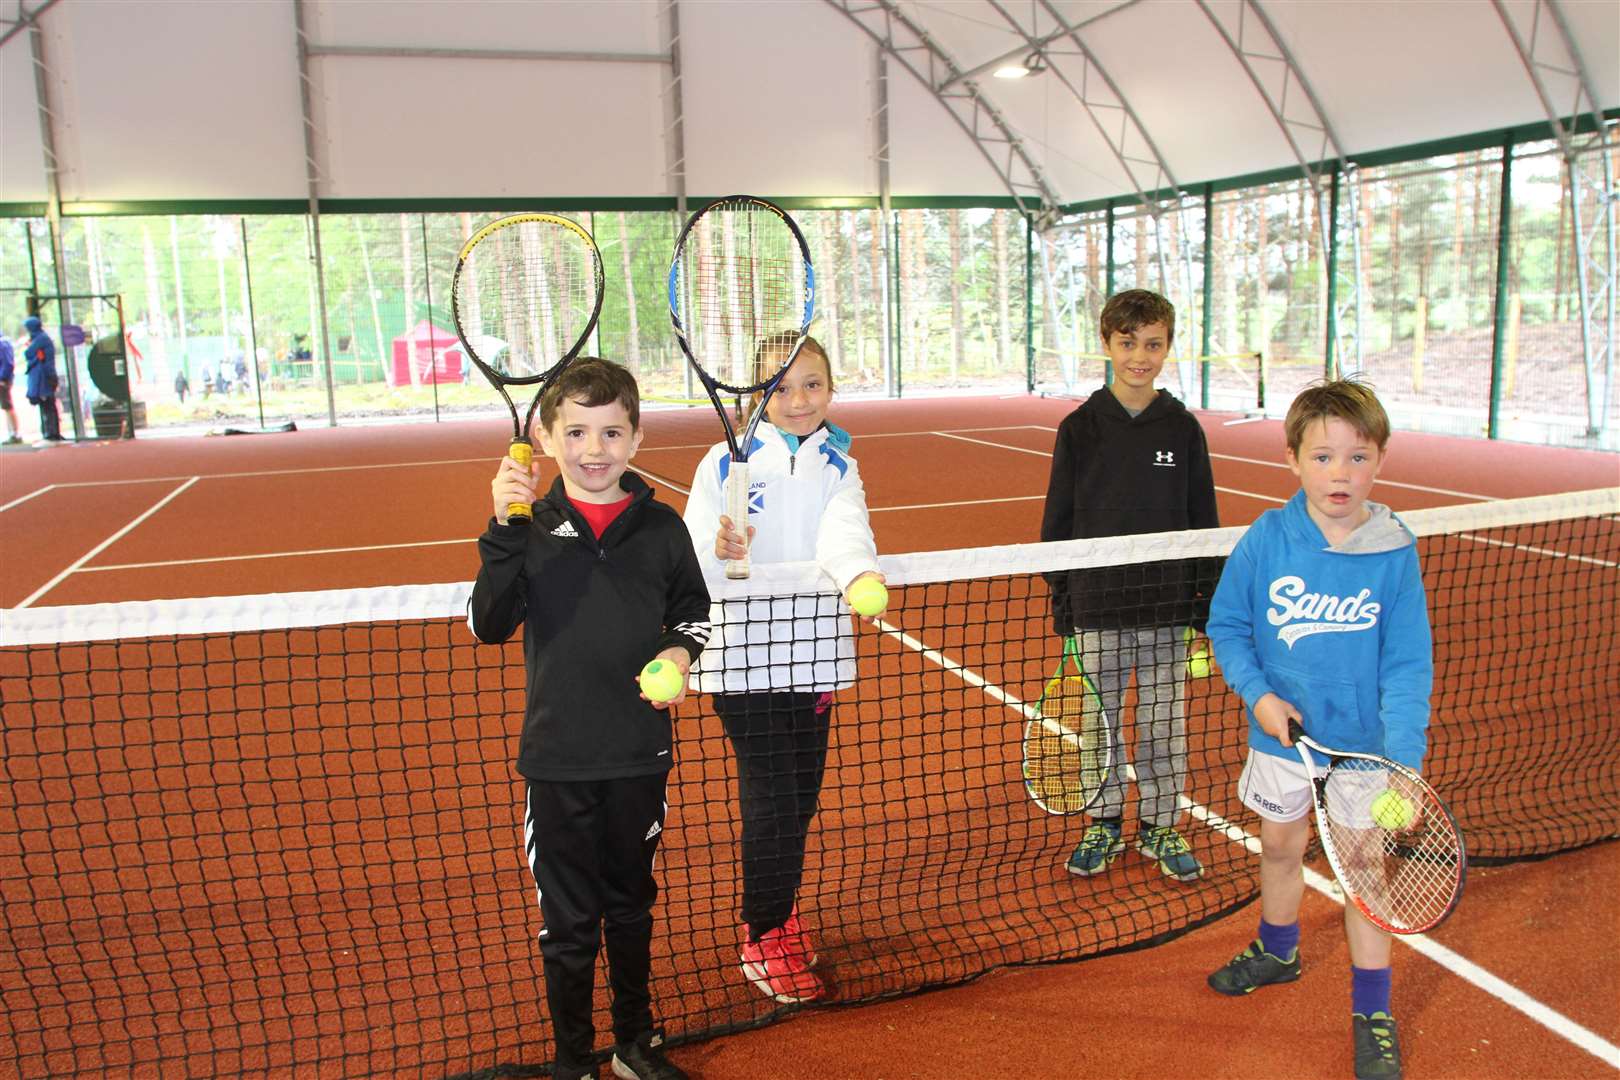 Some budding young tennis players pictured after the opening of the new all-weather court at Rothiemurchus which is the venue for this weekend's contest.